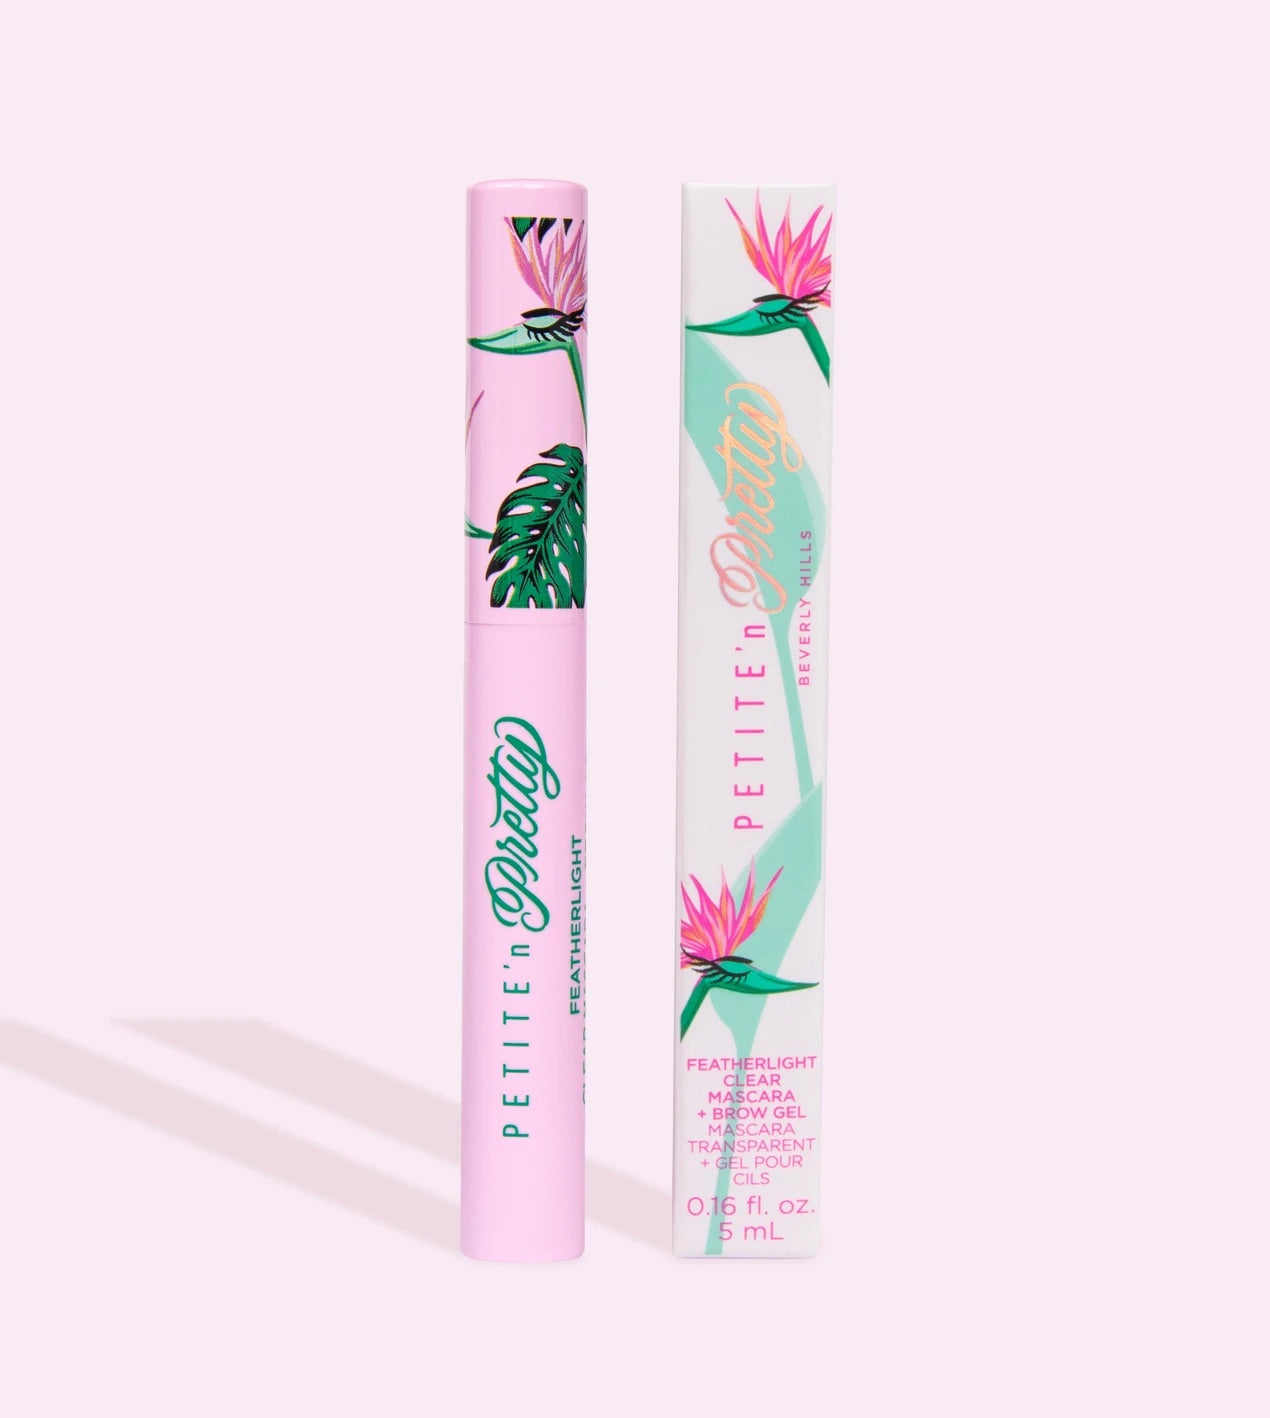 Featherlight Clear Mascara and Brow Gel  - Doodlebug's Children's Boutique